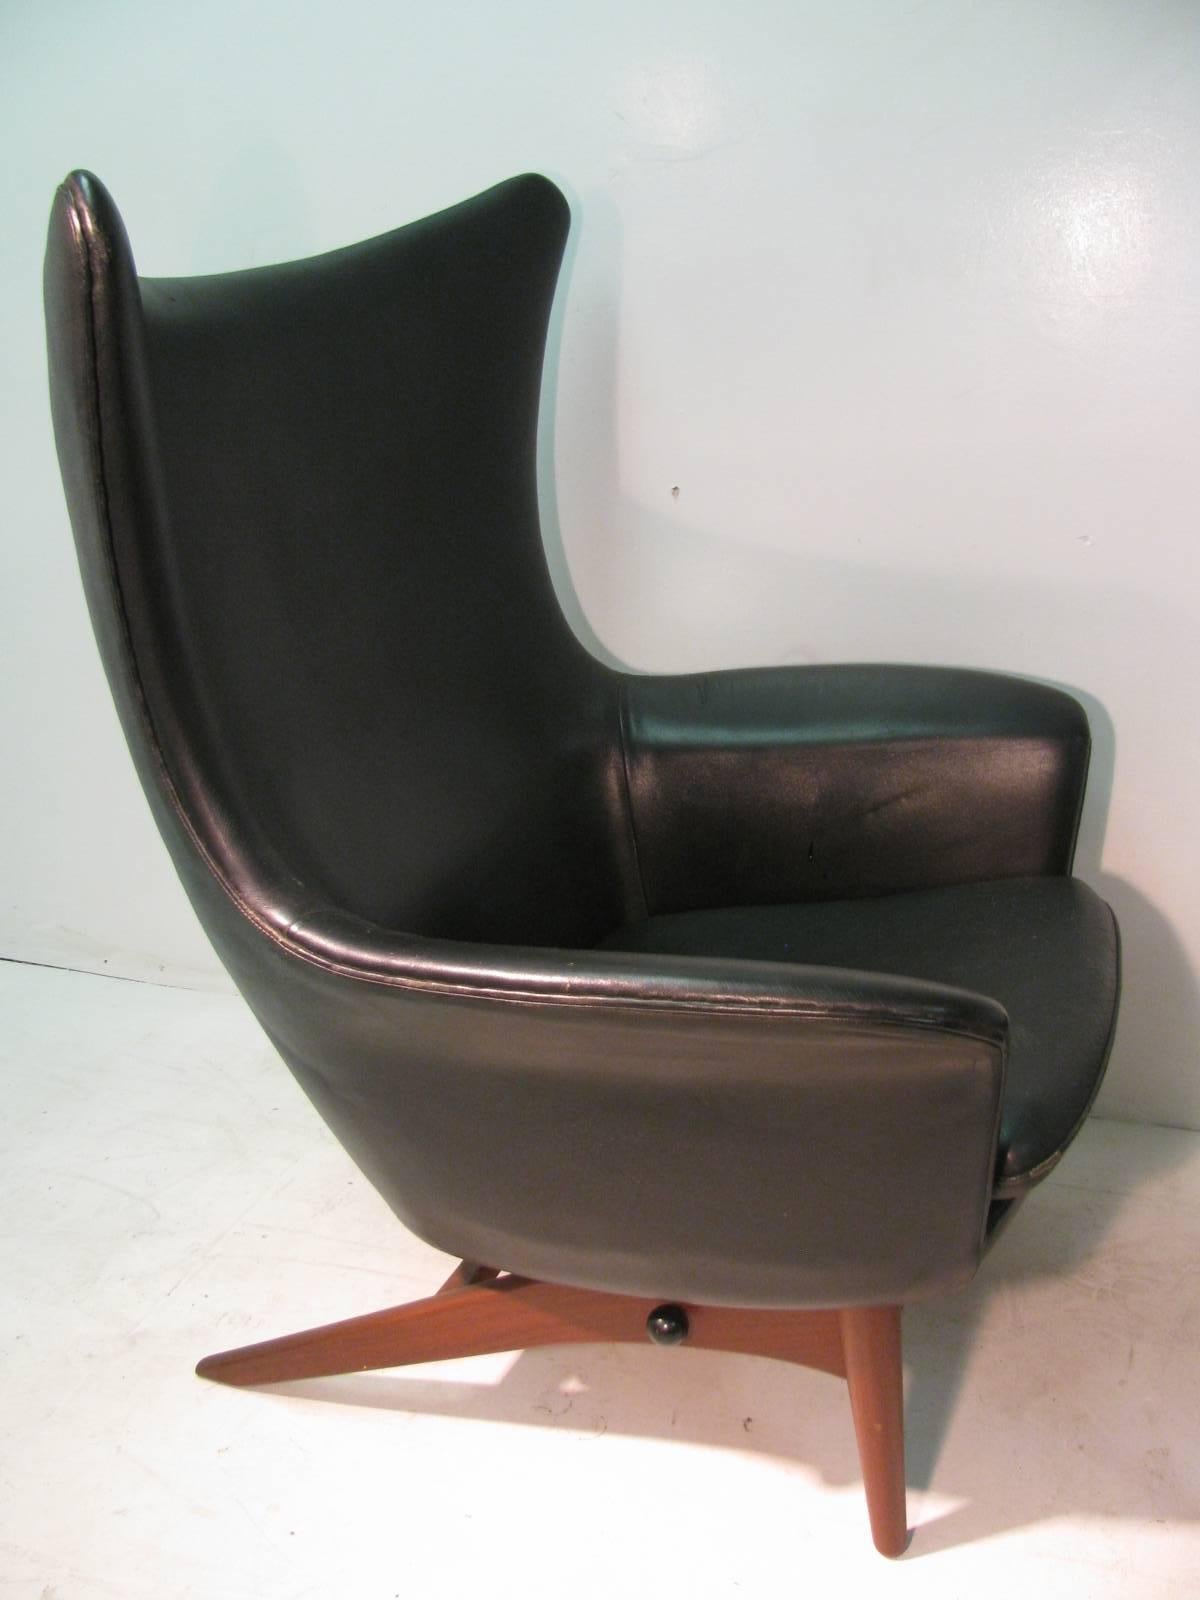 Fabulous five position leather recliner by Bramin for H. W. Klein. Chair with the ottoman supported by a sculpted teak frame. Ottoman size is W 21.75, H 14.5, D 18.